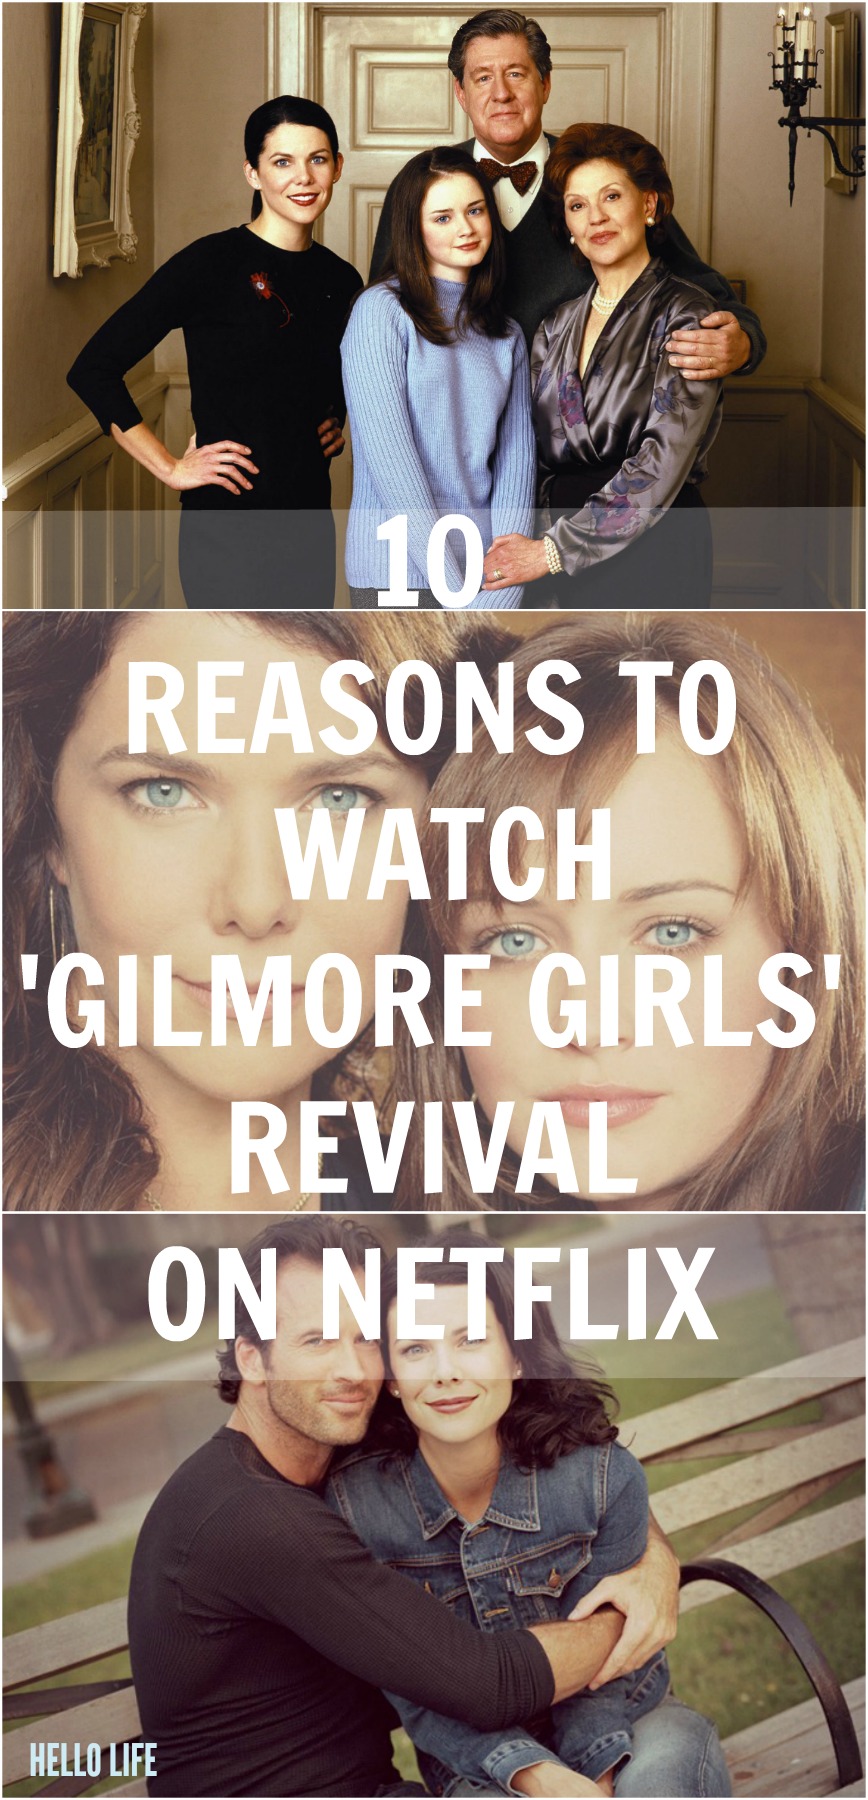 10 Reasons To Watch 'Gilmore Girls' Revival on Netflix Hello Life hellolifeonline.com